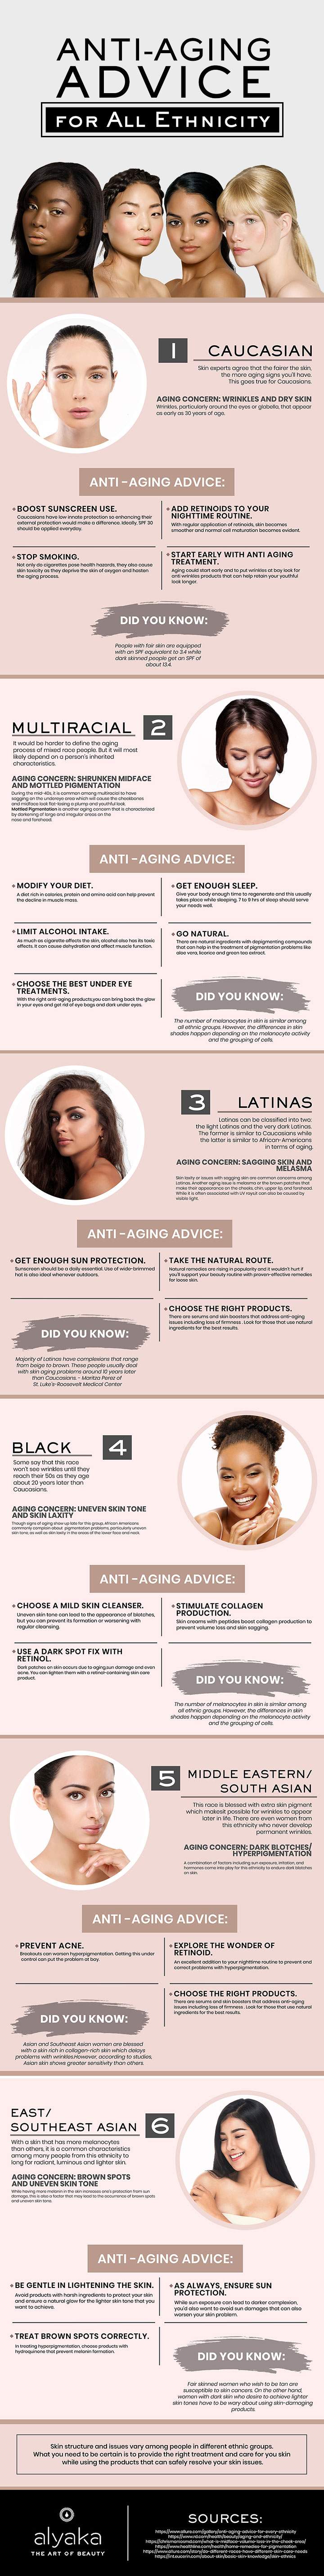 Anti-Aging-Advice-for-All-Ethnicity